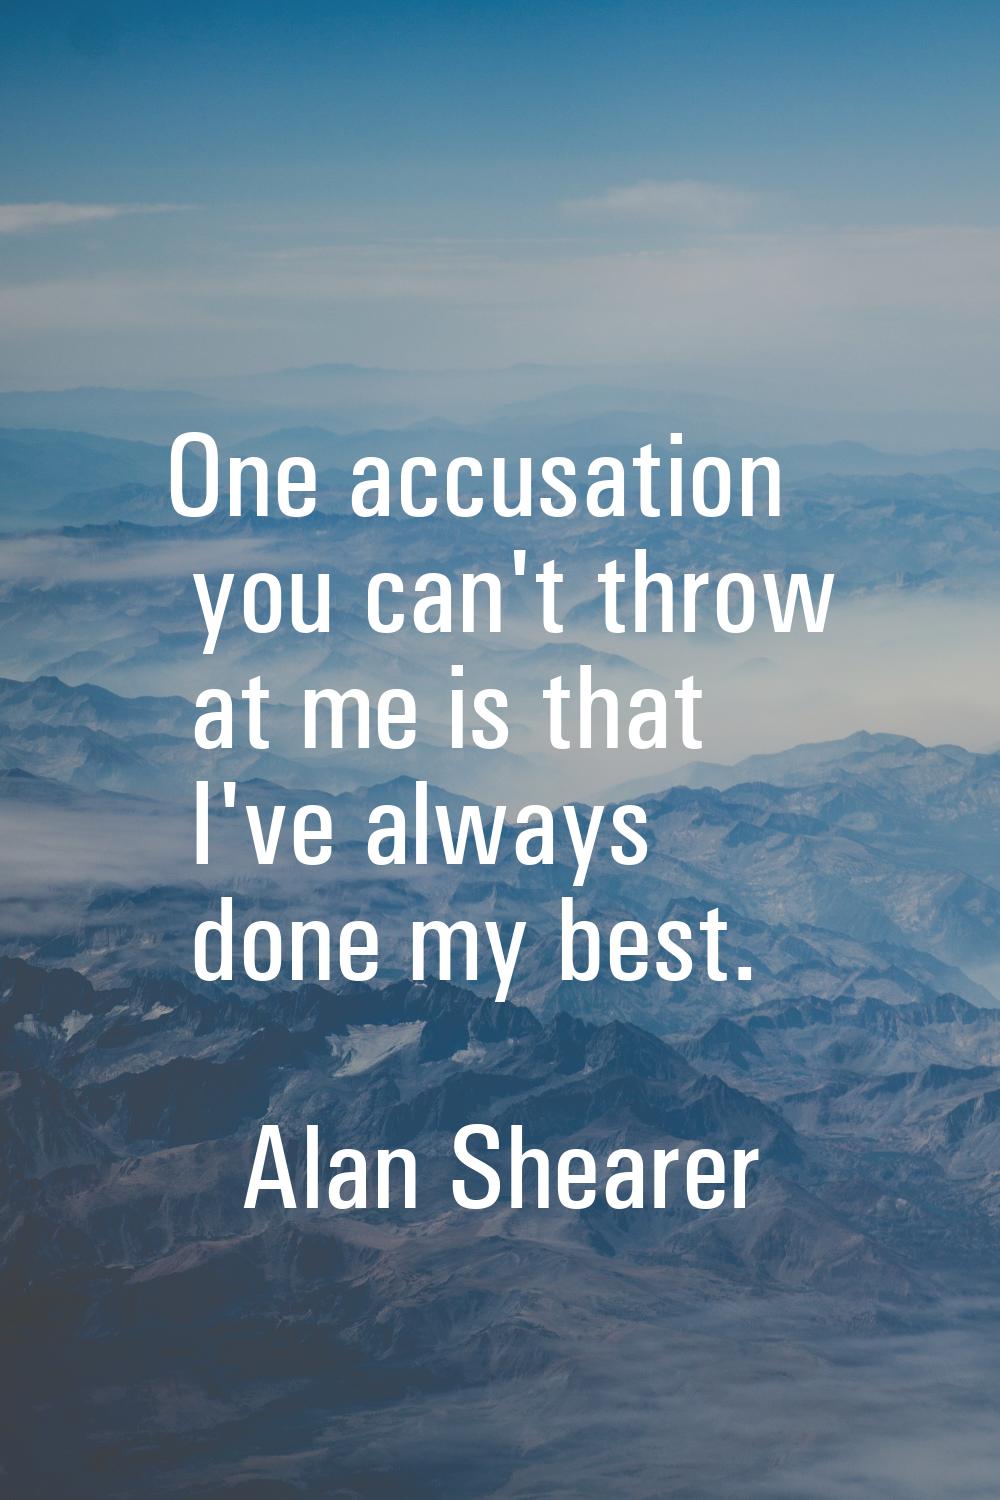 One accusation you can't throw at me is that I've always done my best.